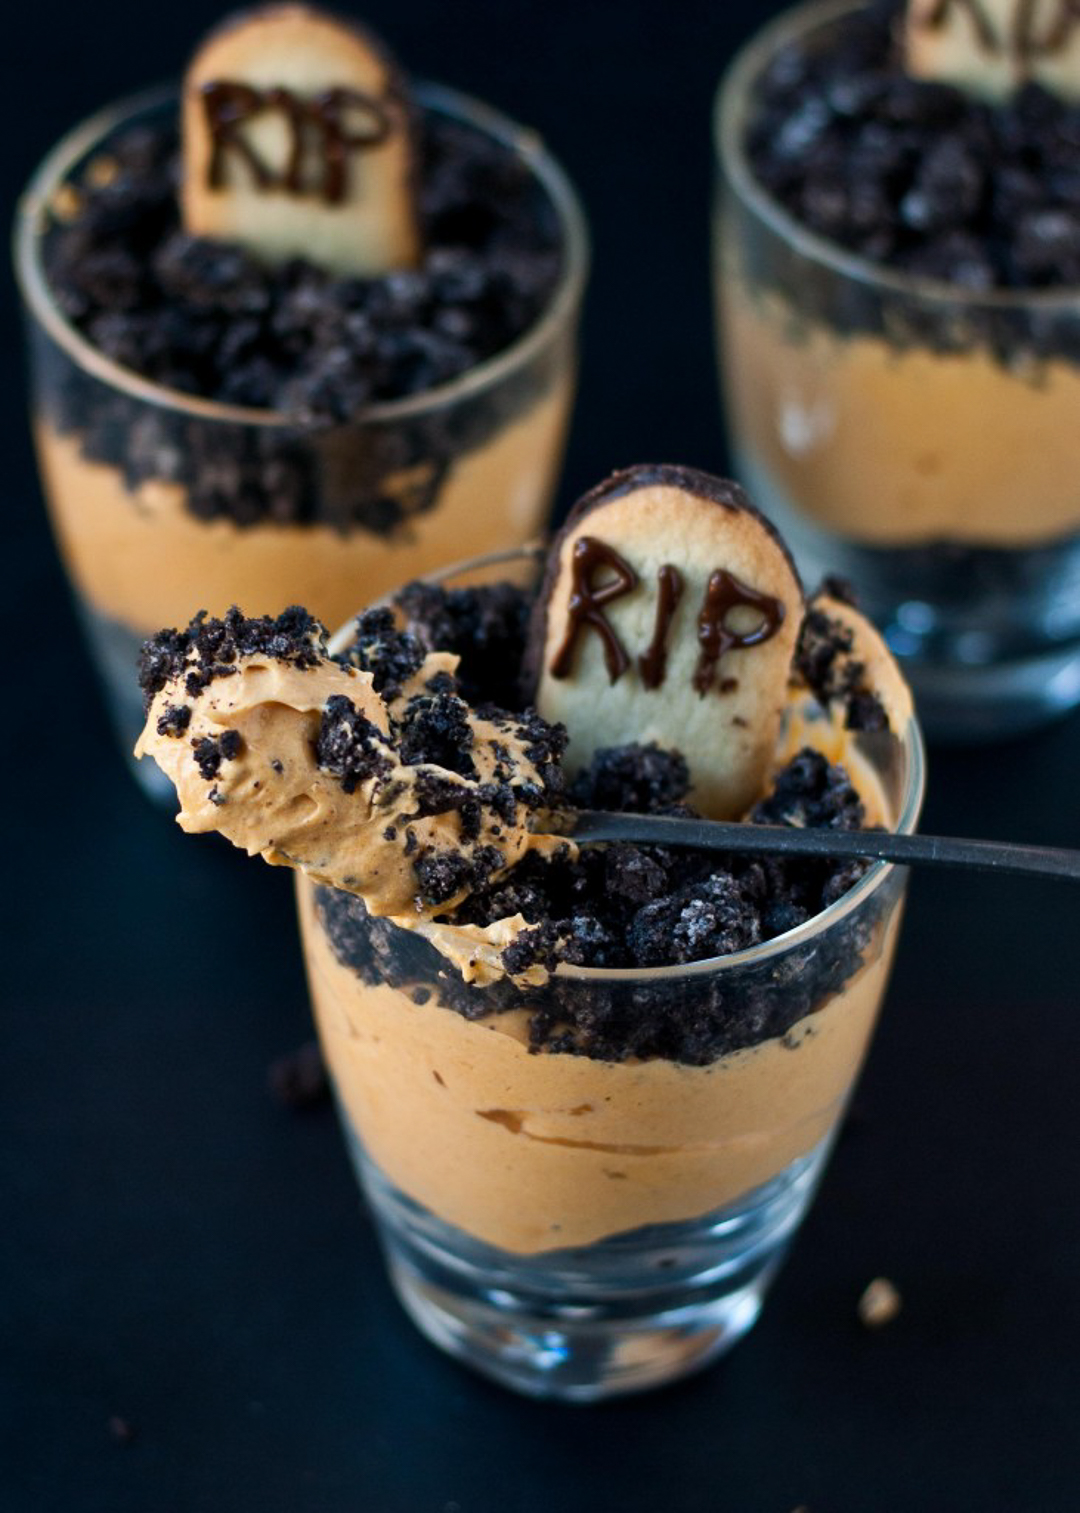 Halloween dirt cup with an RIP tombstone on top for a scary Halloween treat.